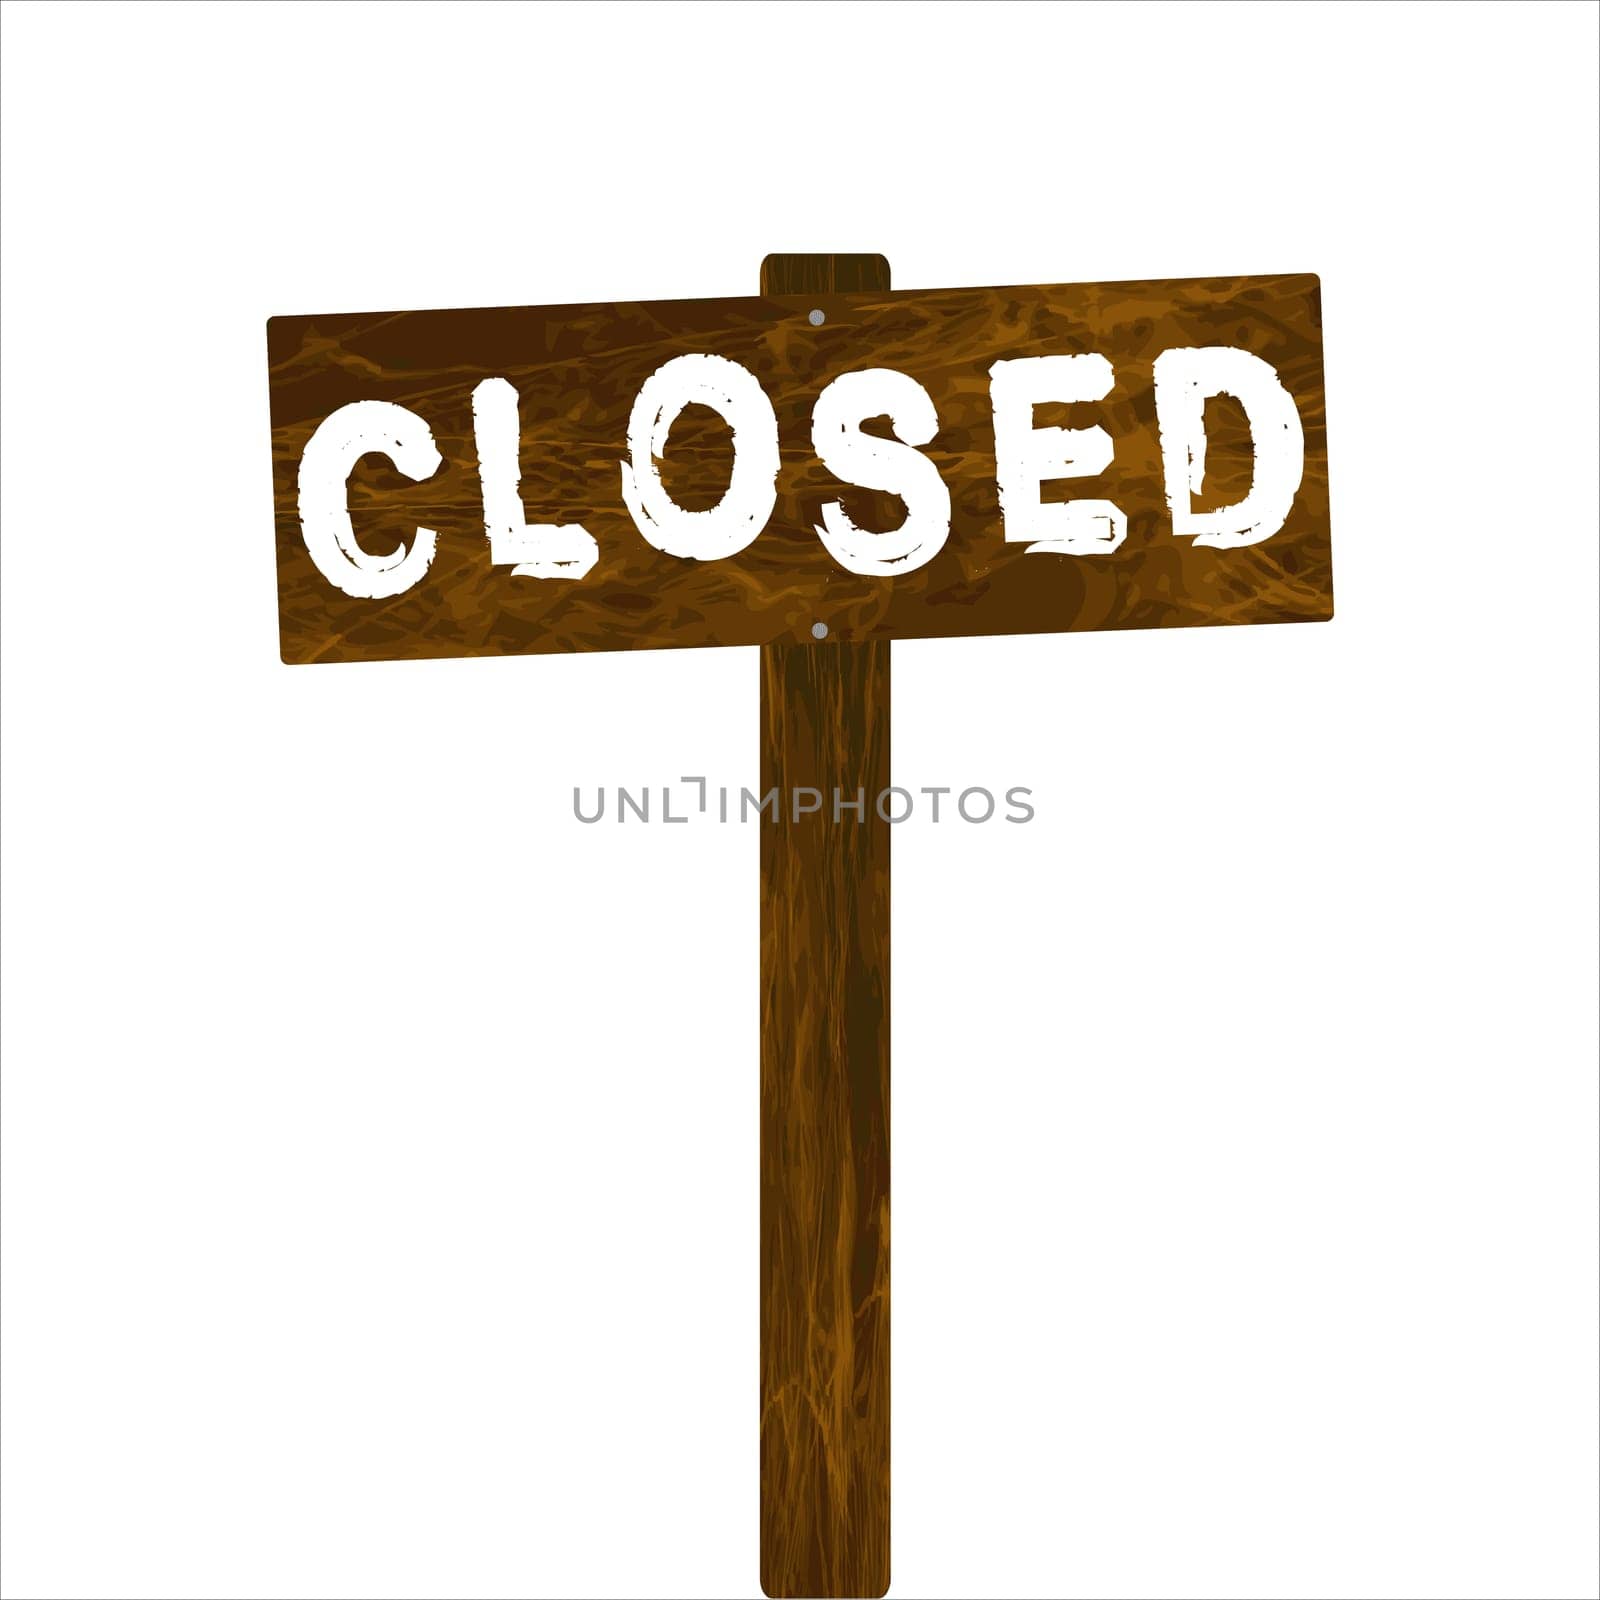 Closed wooden sign isolated on white background